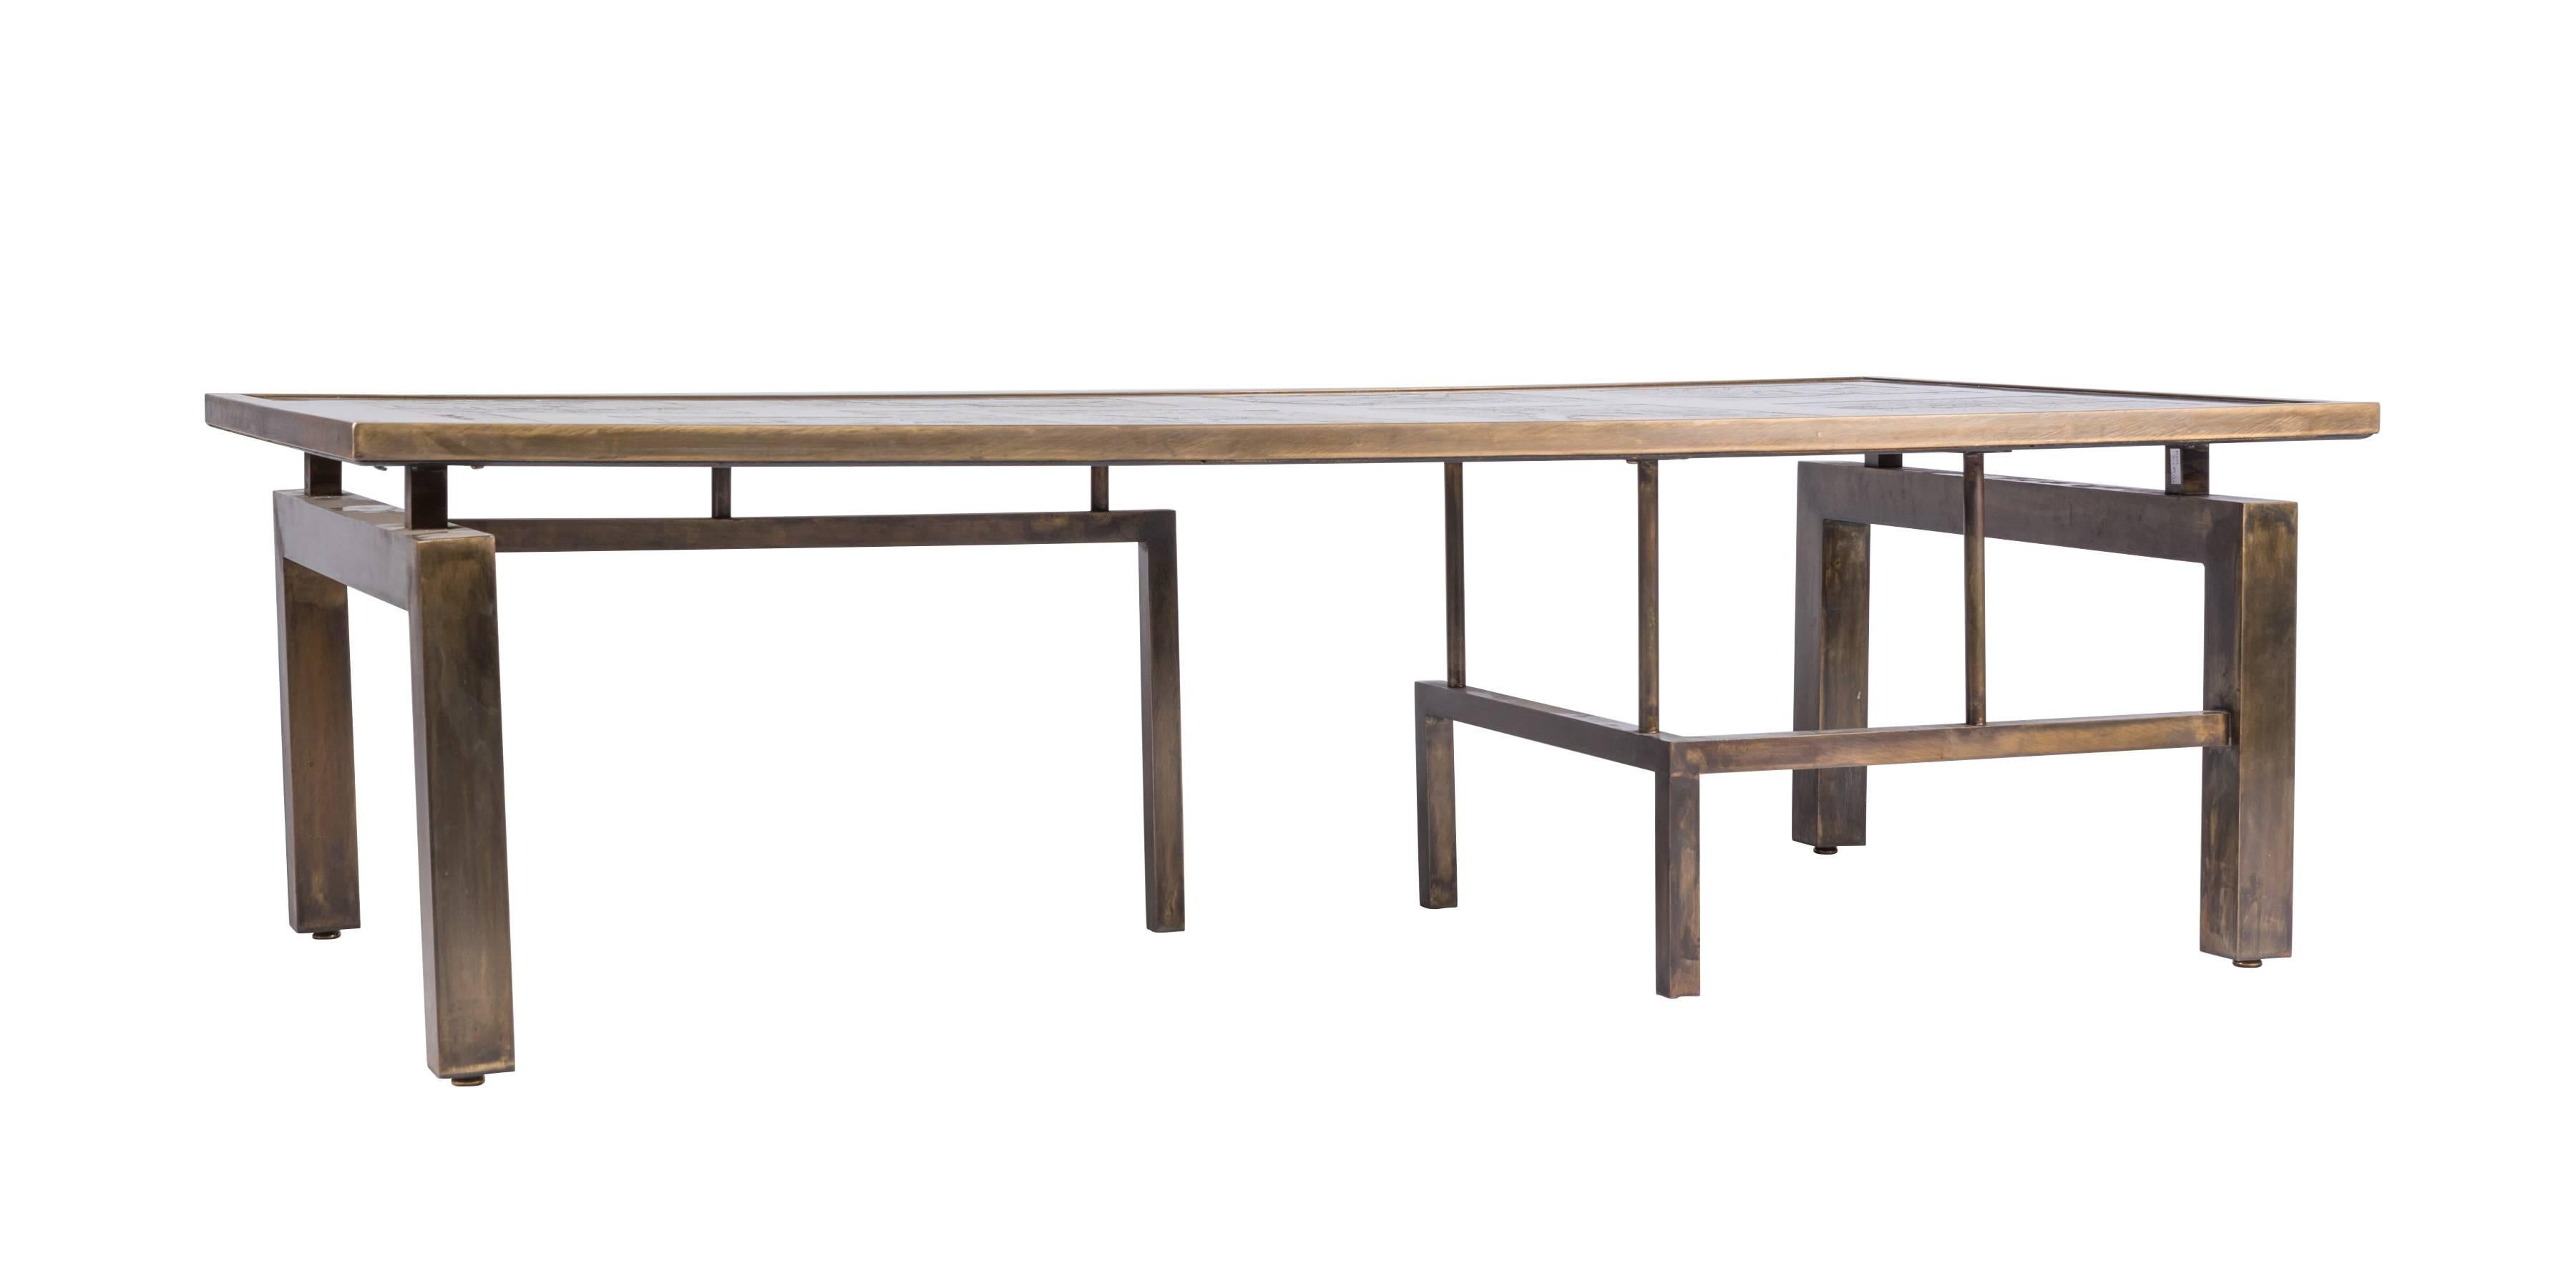 Rare Medici coffee table by Philip and Kelvin LaVerne, circa 1965 with interesting architectural base. Comprised of acid-etched and enameled patinated brass. Signed. A fine and very clean example.